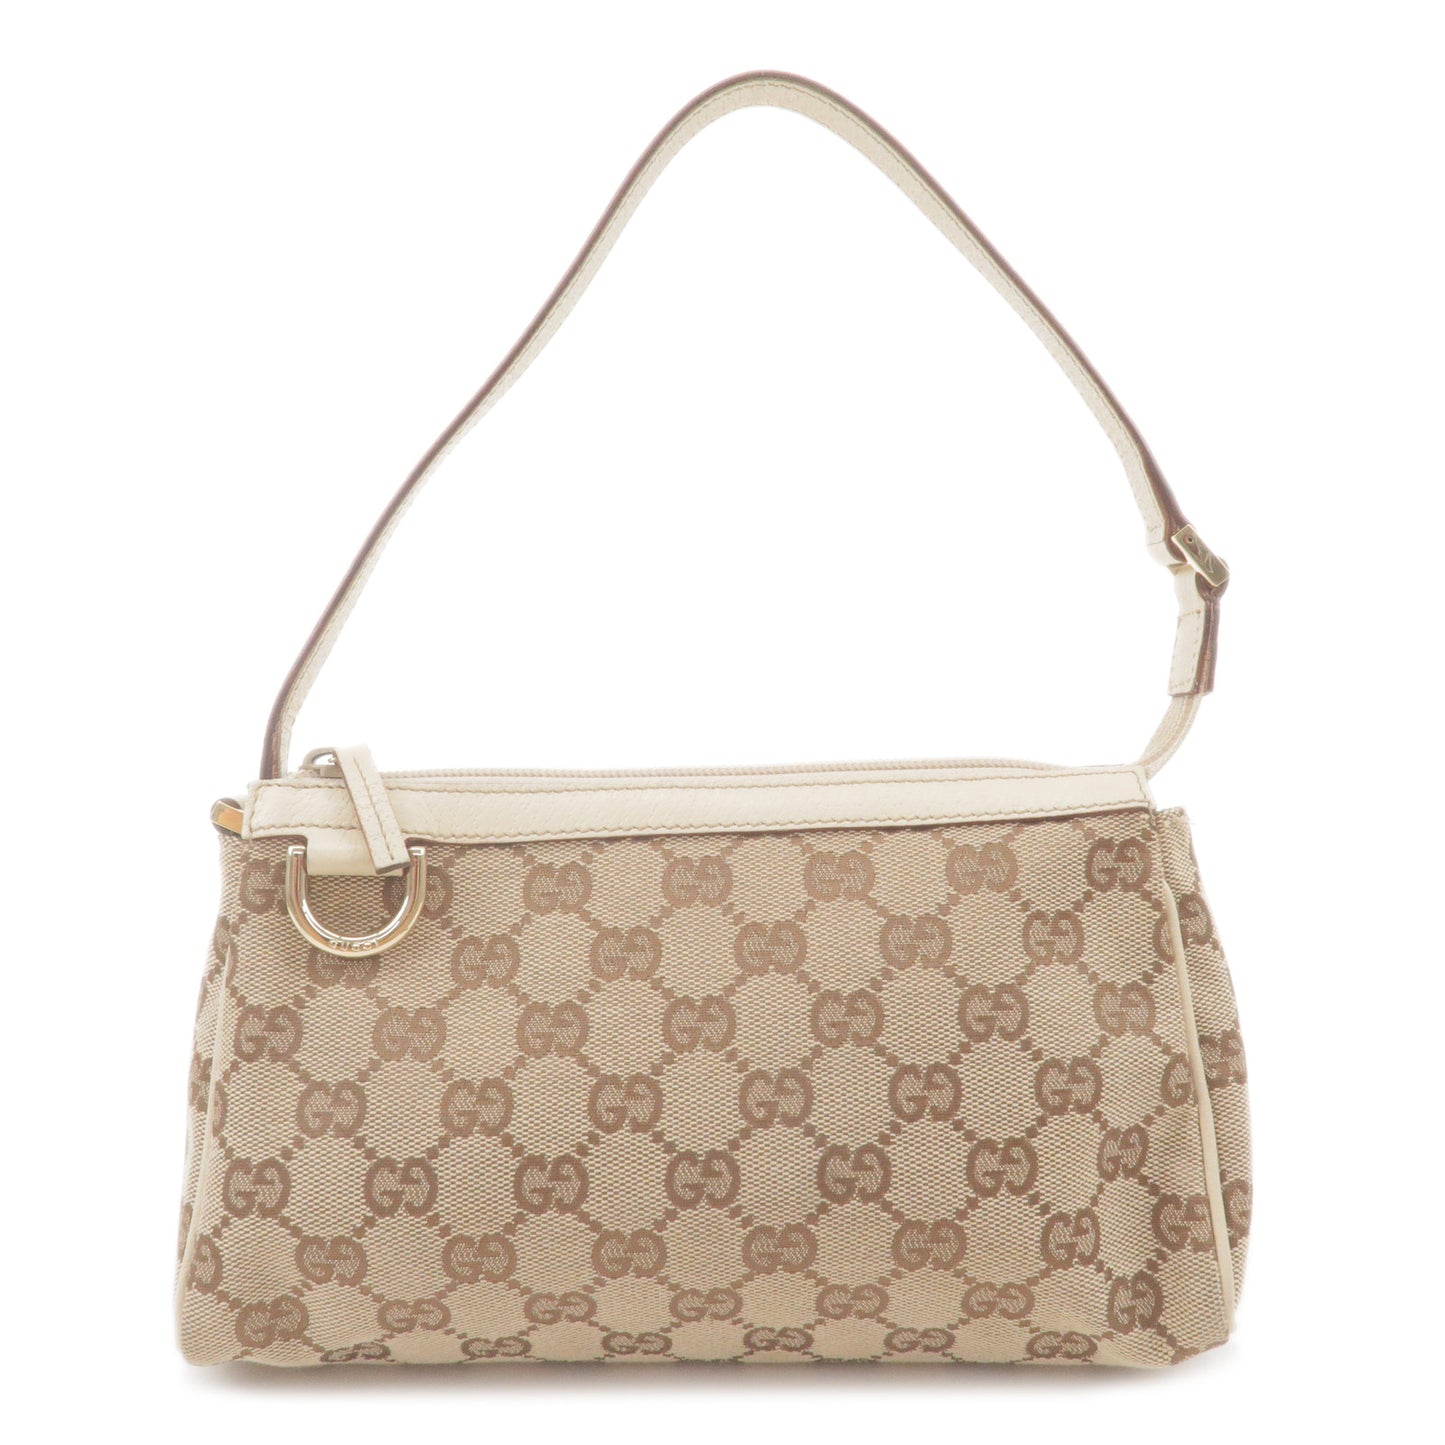 GUCCI-Abbey-GG-Canvas-Leather-Bag-Pouch-Beige-White-145750